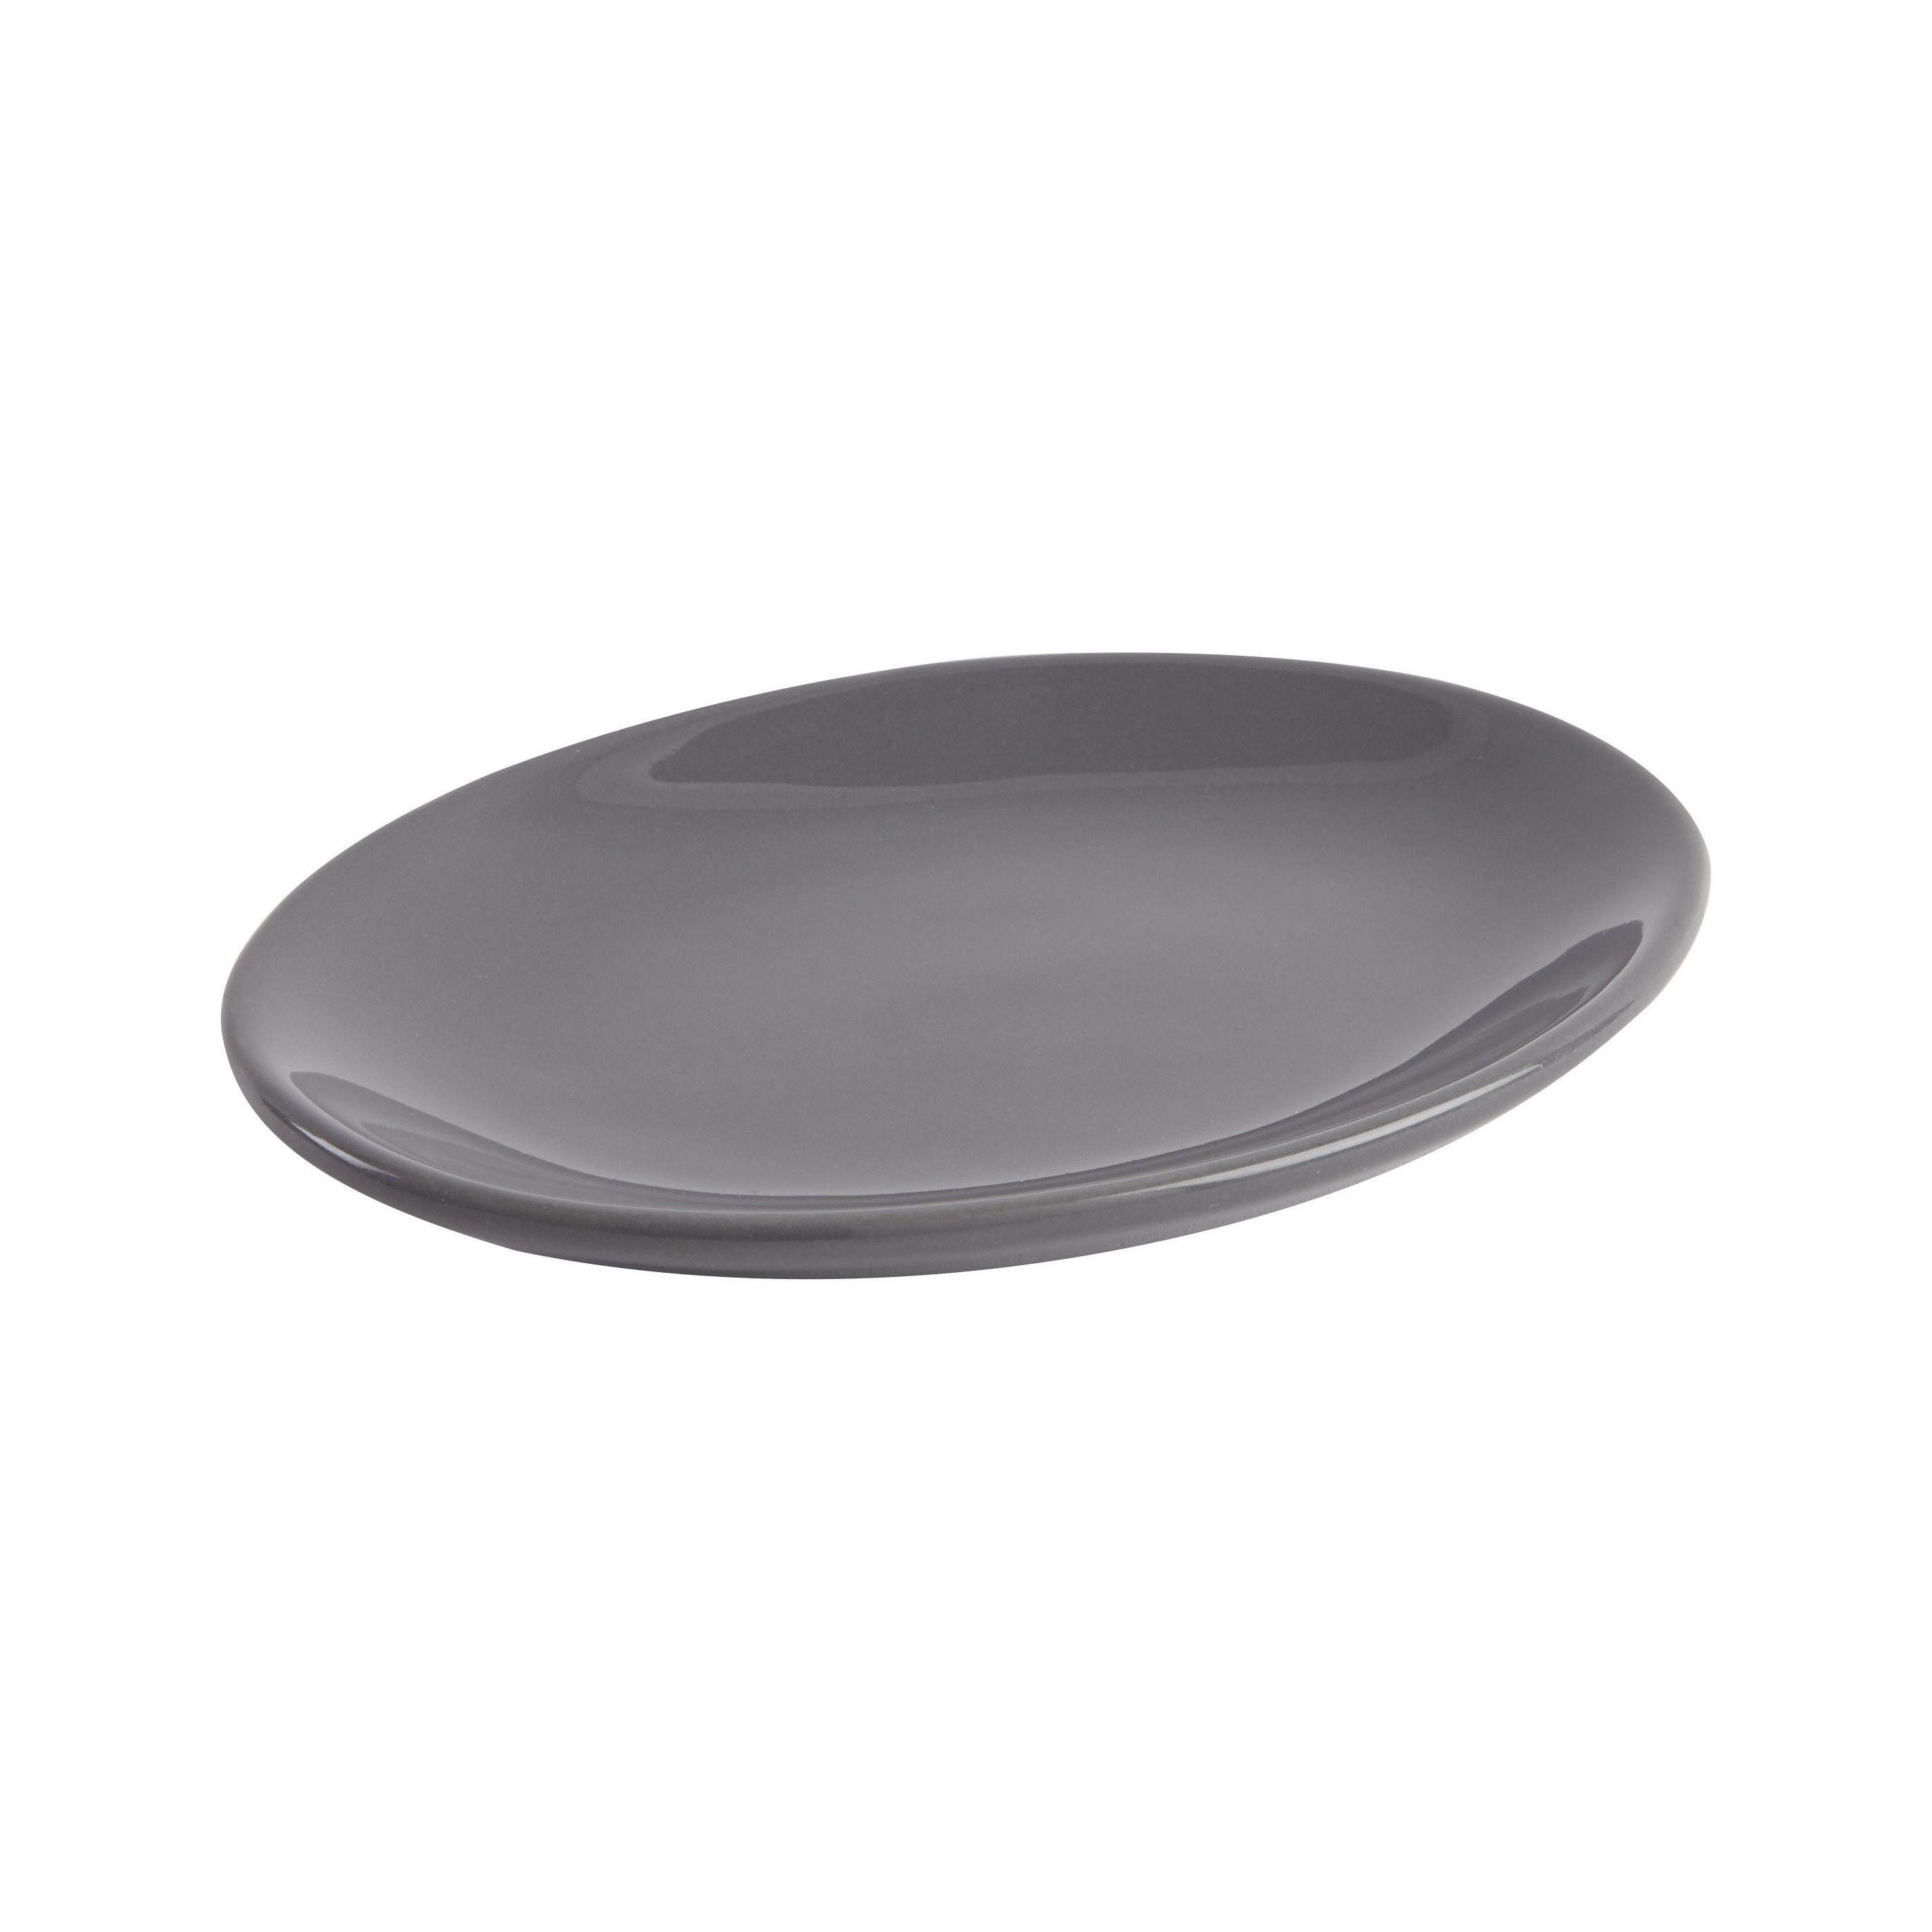 Cooke & Lewis Diani Anthracite Gloss Ceramic Soap Dish (W)105mm